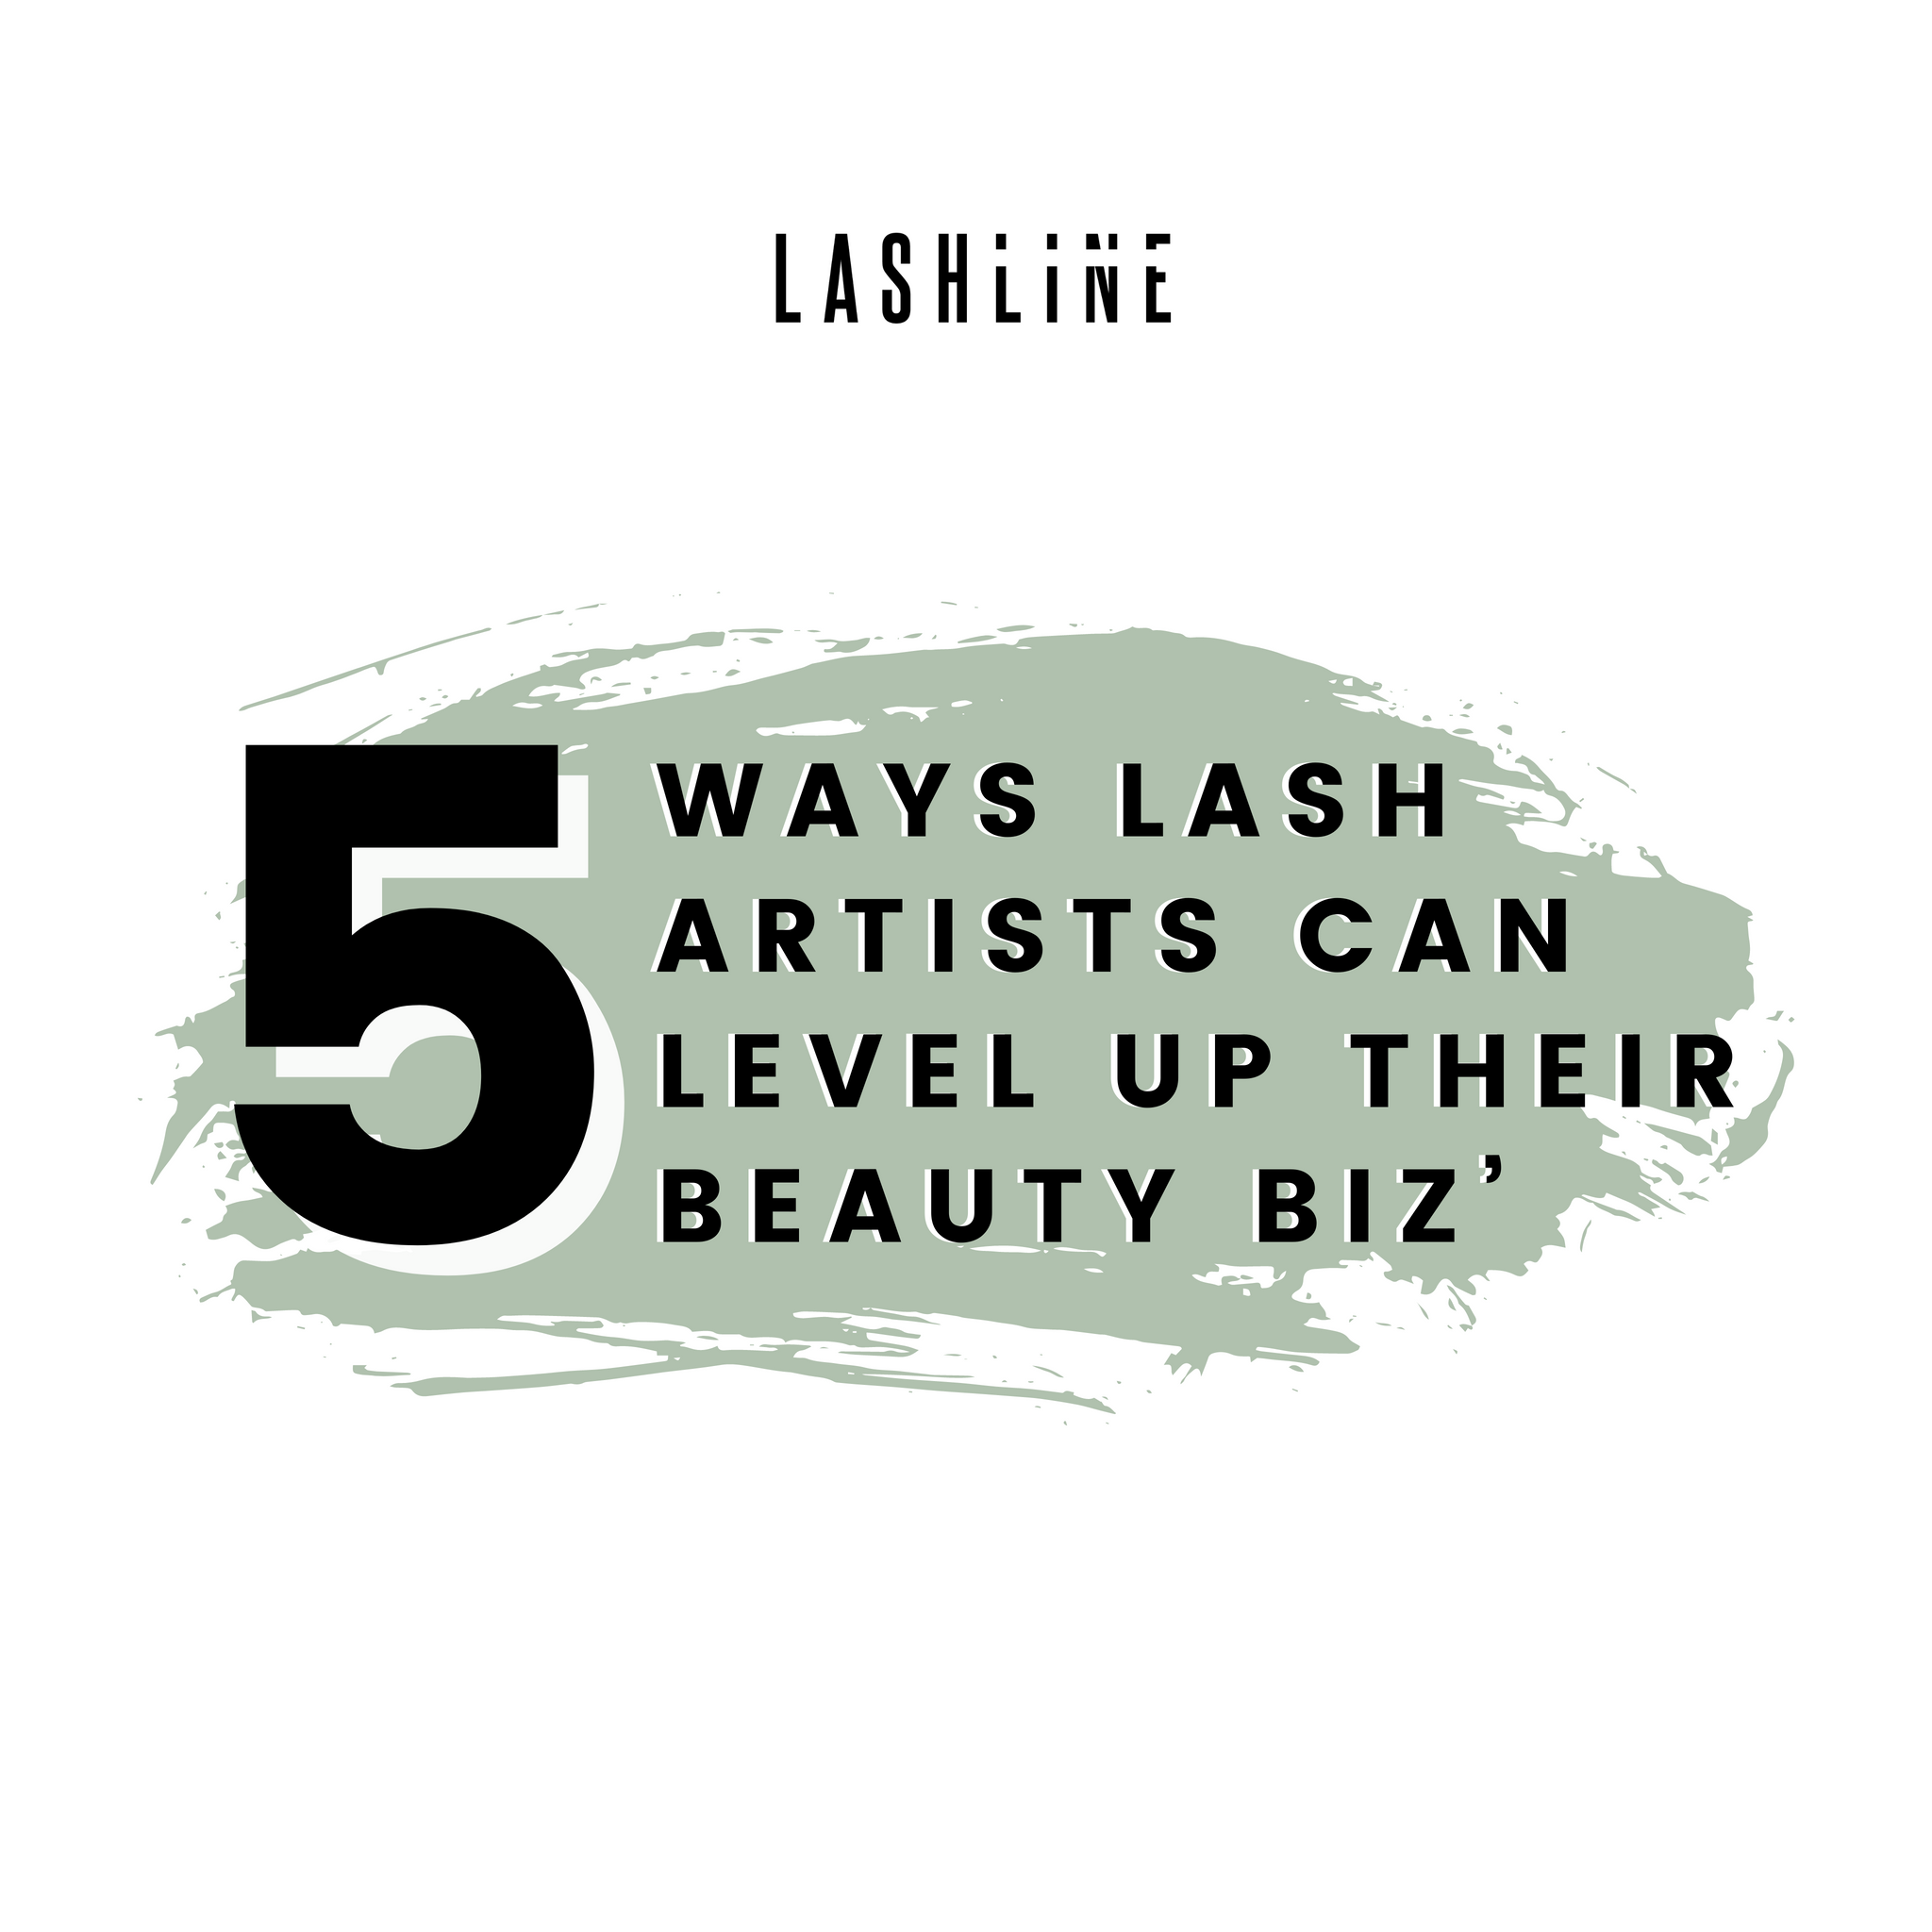 5 Ways Lash Artists Can Level Up Their Beauty Biz'